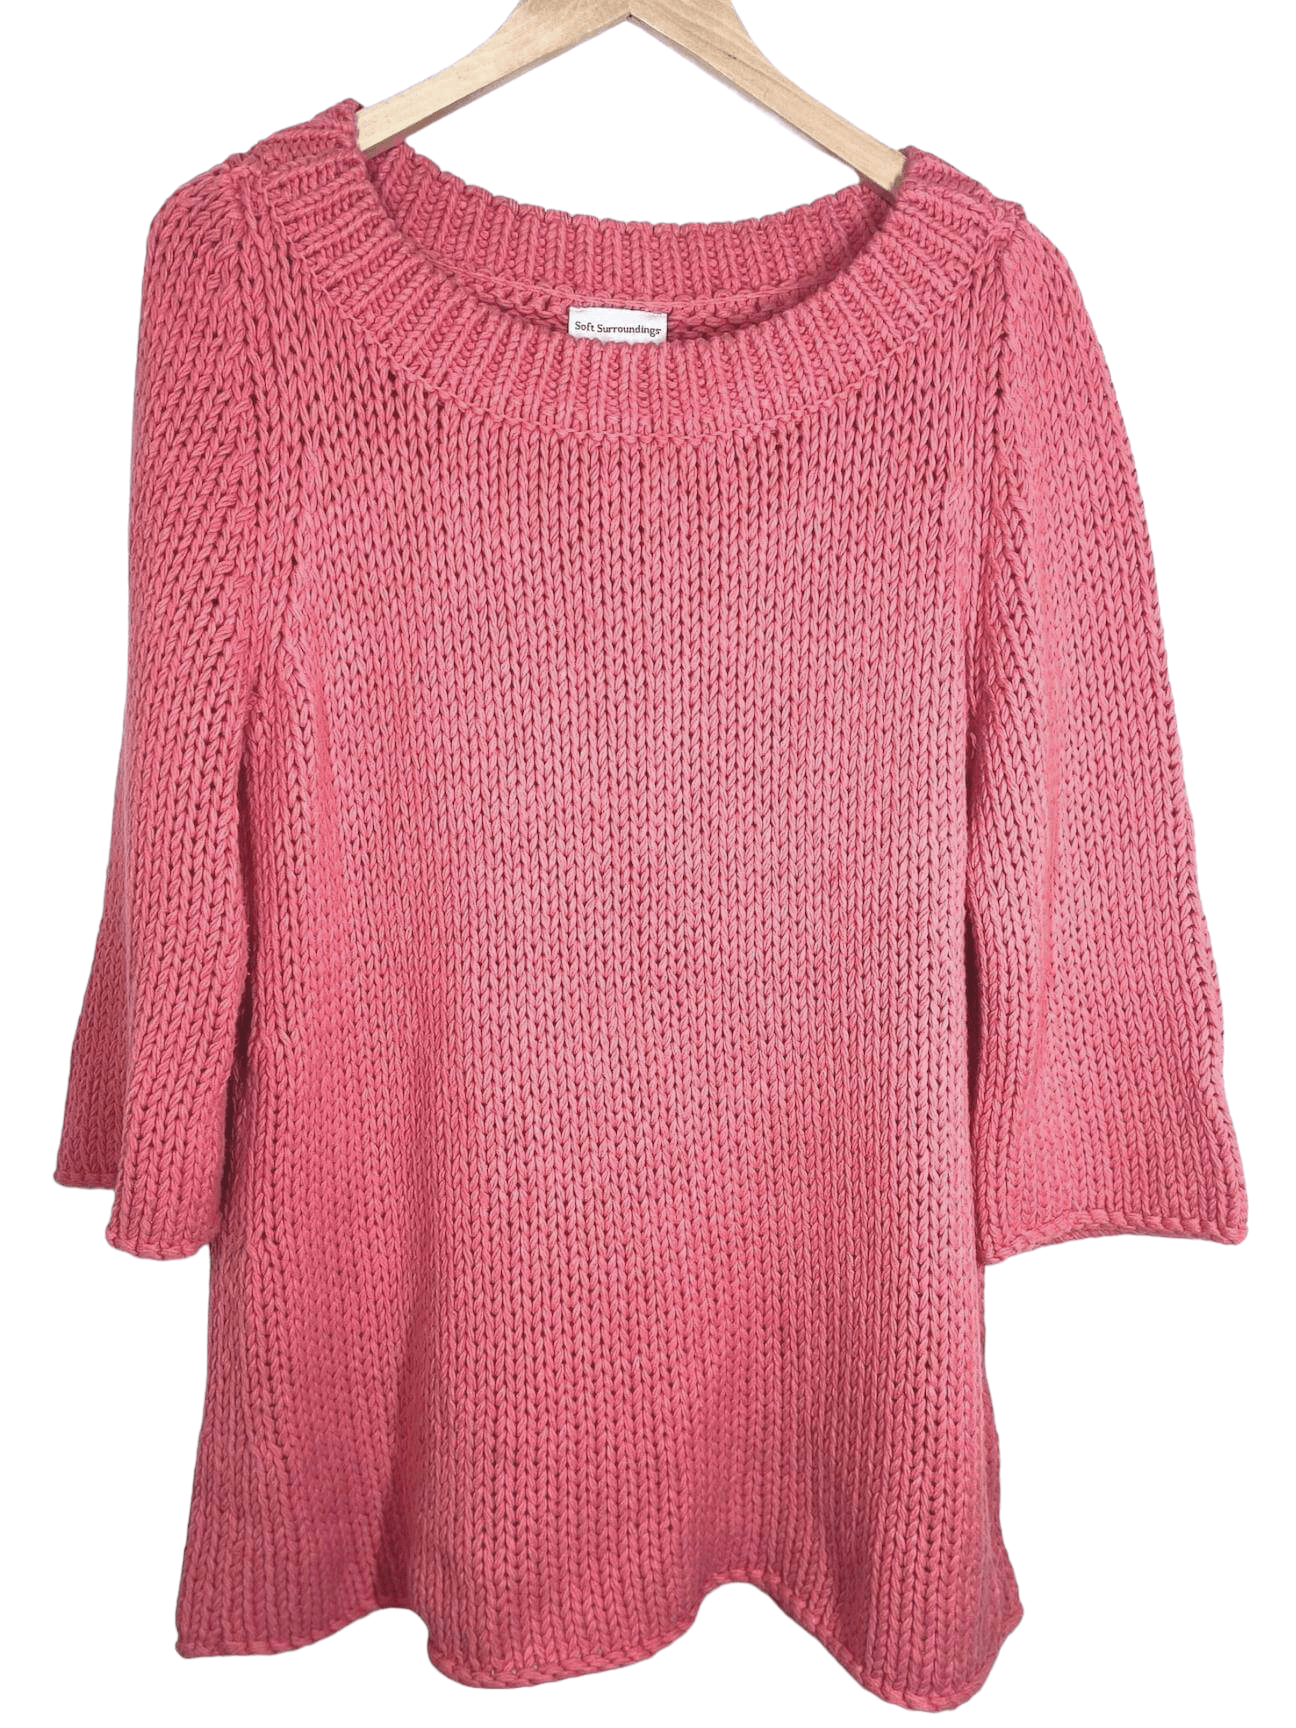 Cool Summer SOFT SURROUNDINGS pink chunky sweater